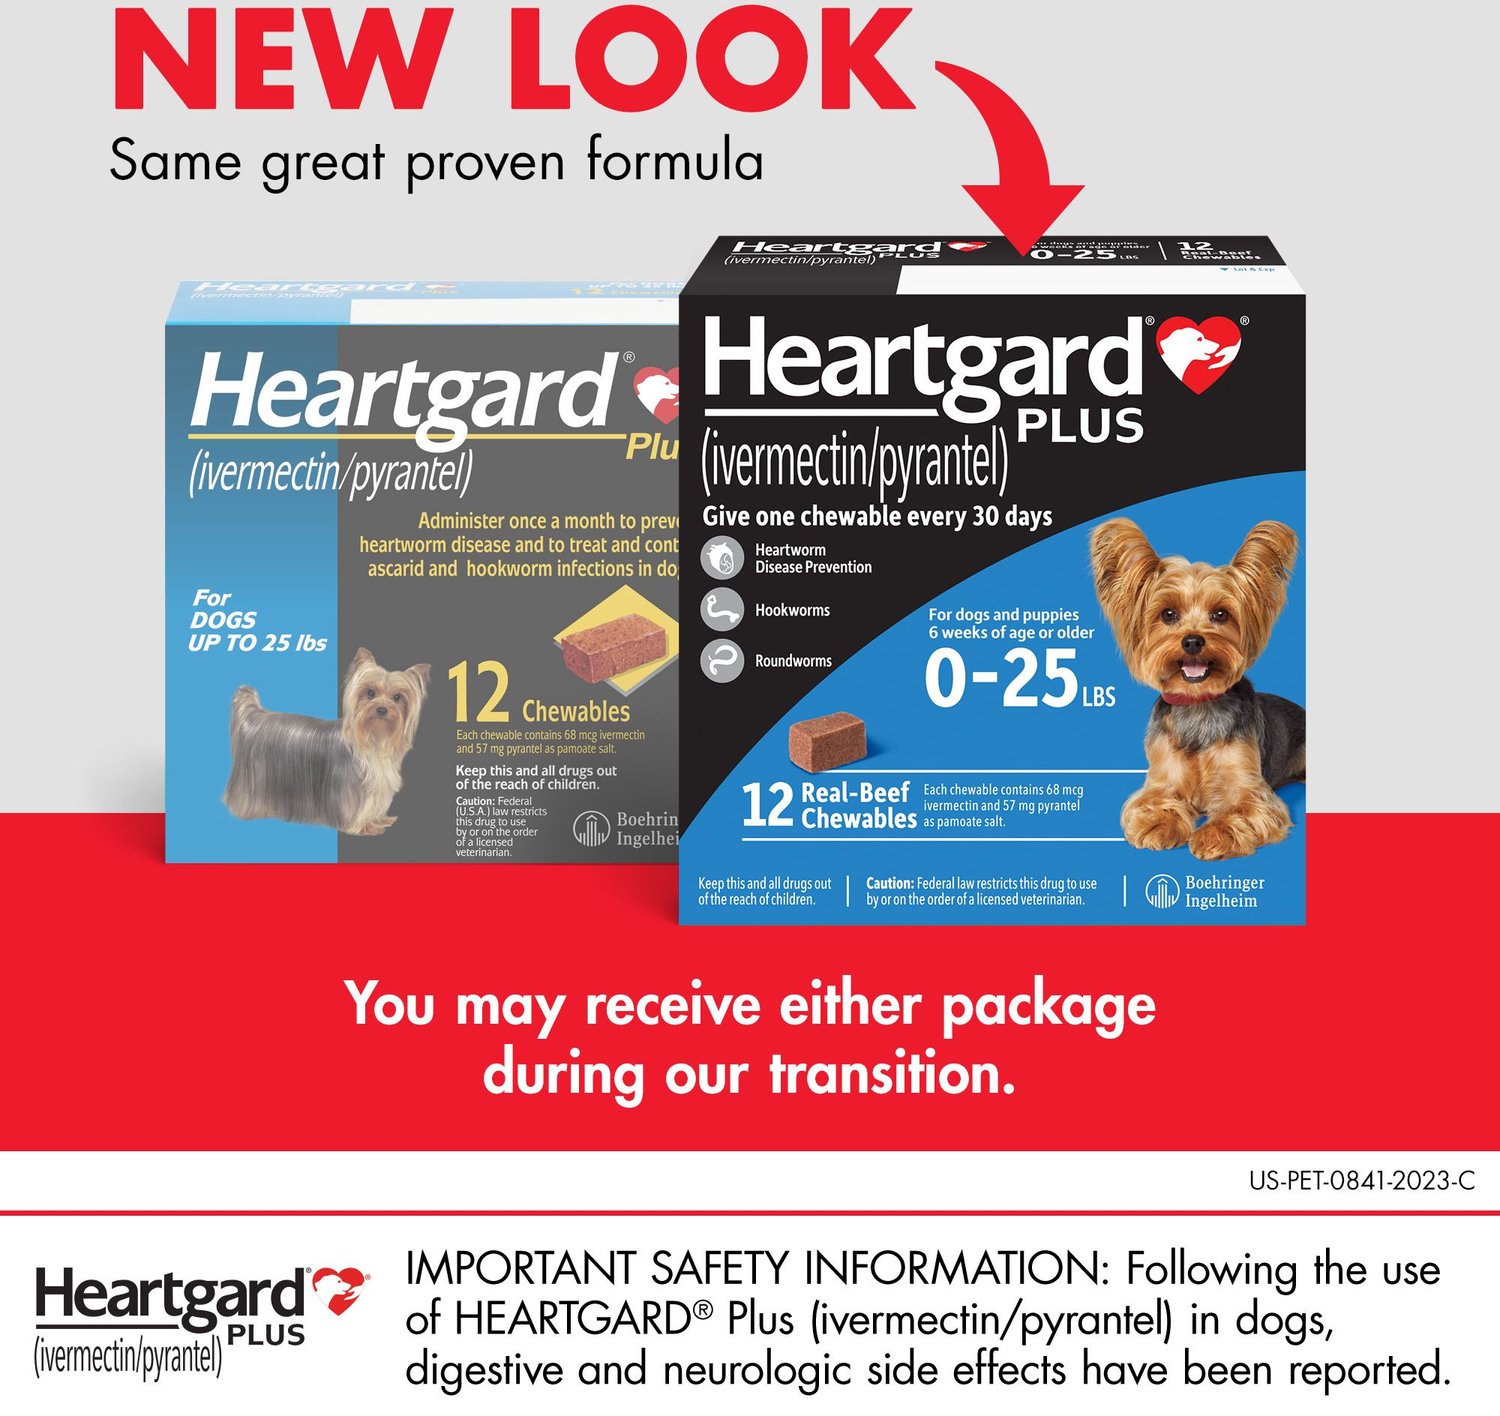 Heartgard Plus Chewable Tablets for Dogs, up to 25 lbs, 12 treatments